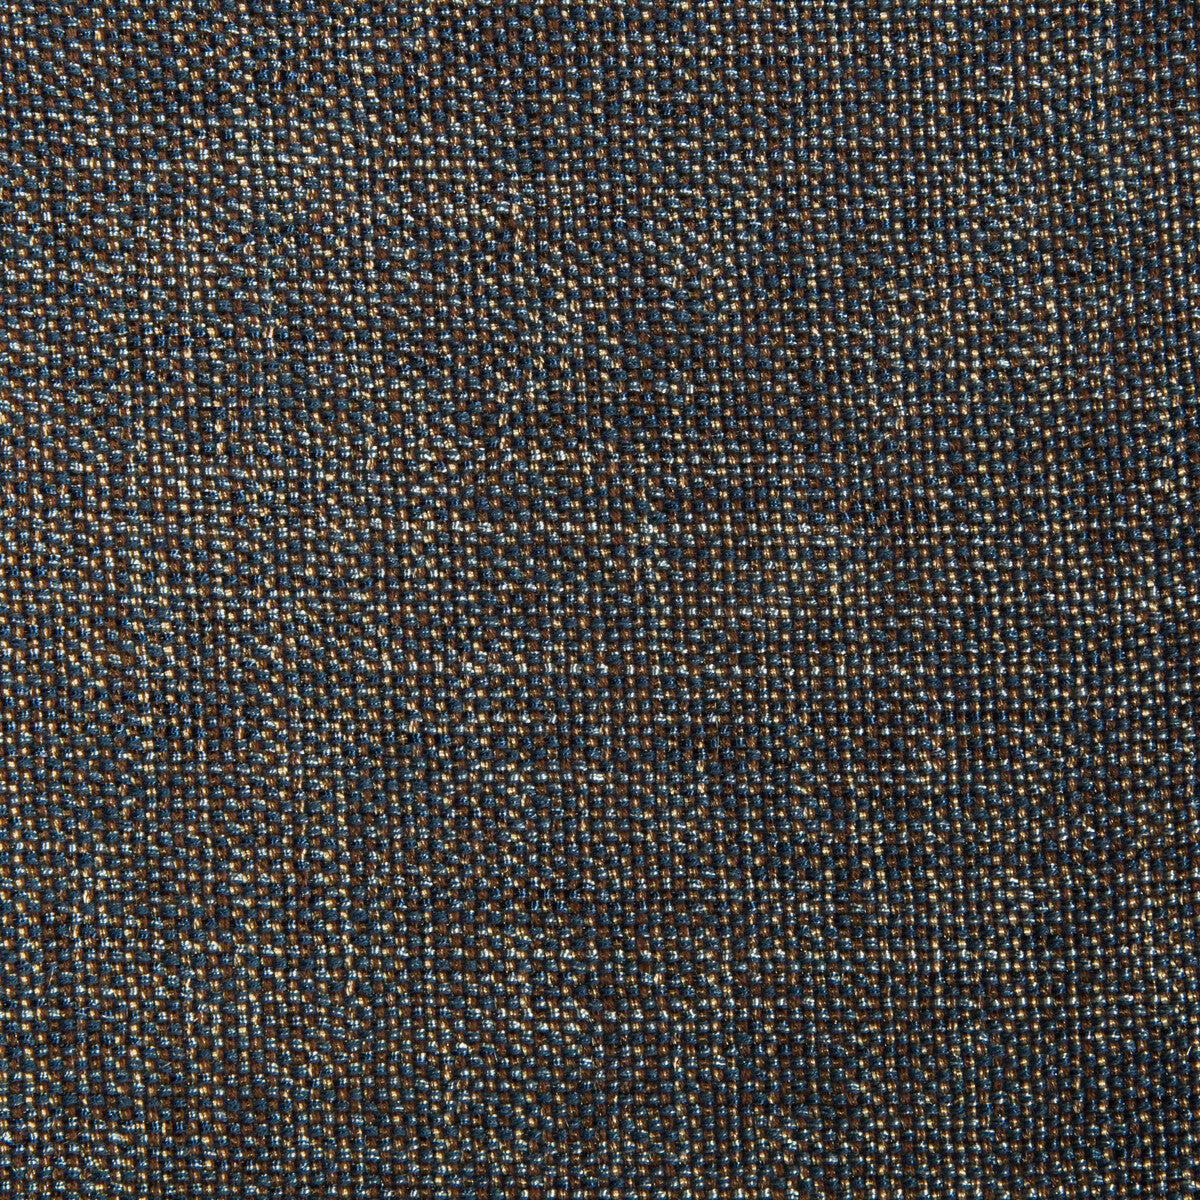 Kravet Contract fabric in 34926-516 color - pattern 34926.516.0 - by Kravet Contract